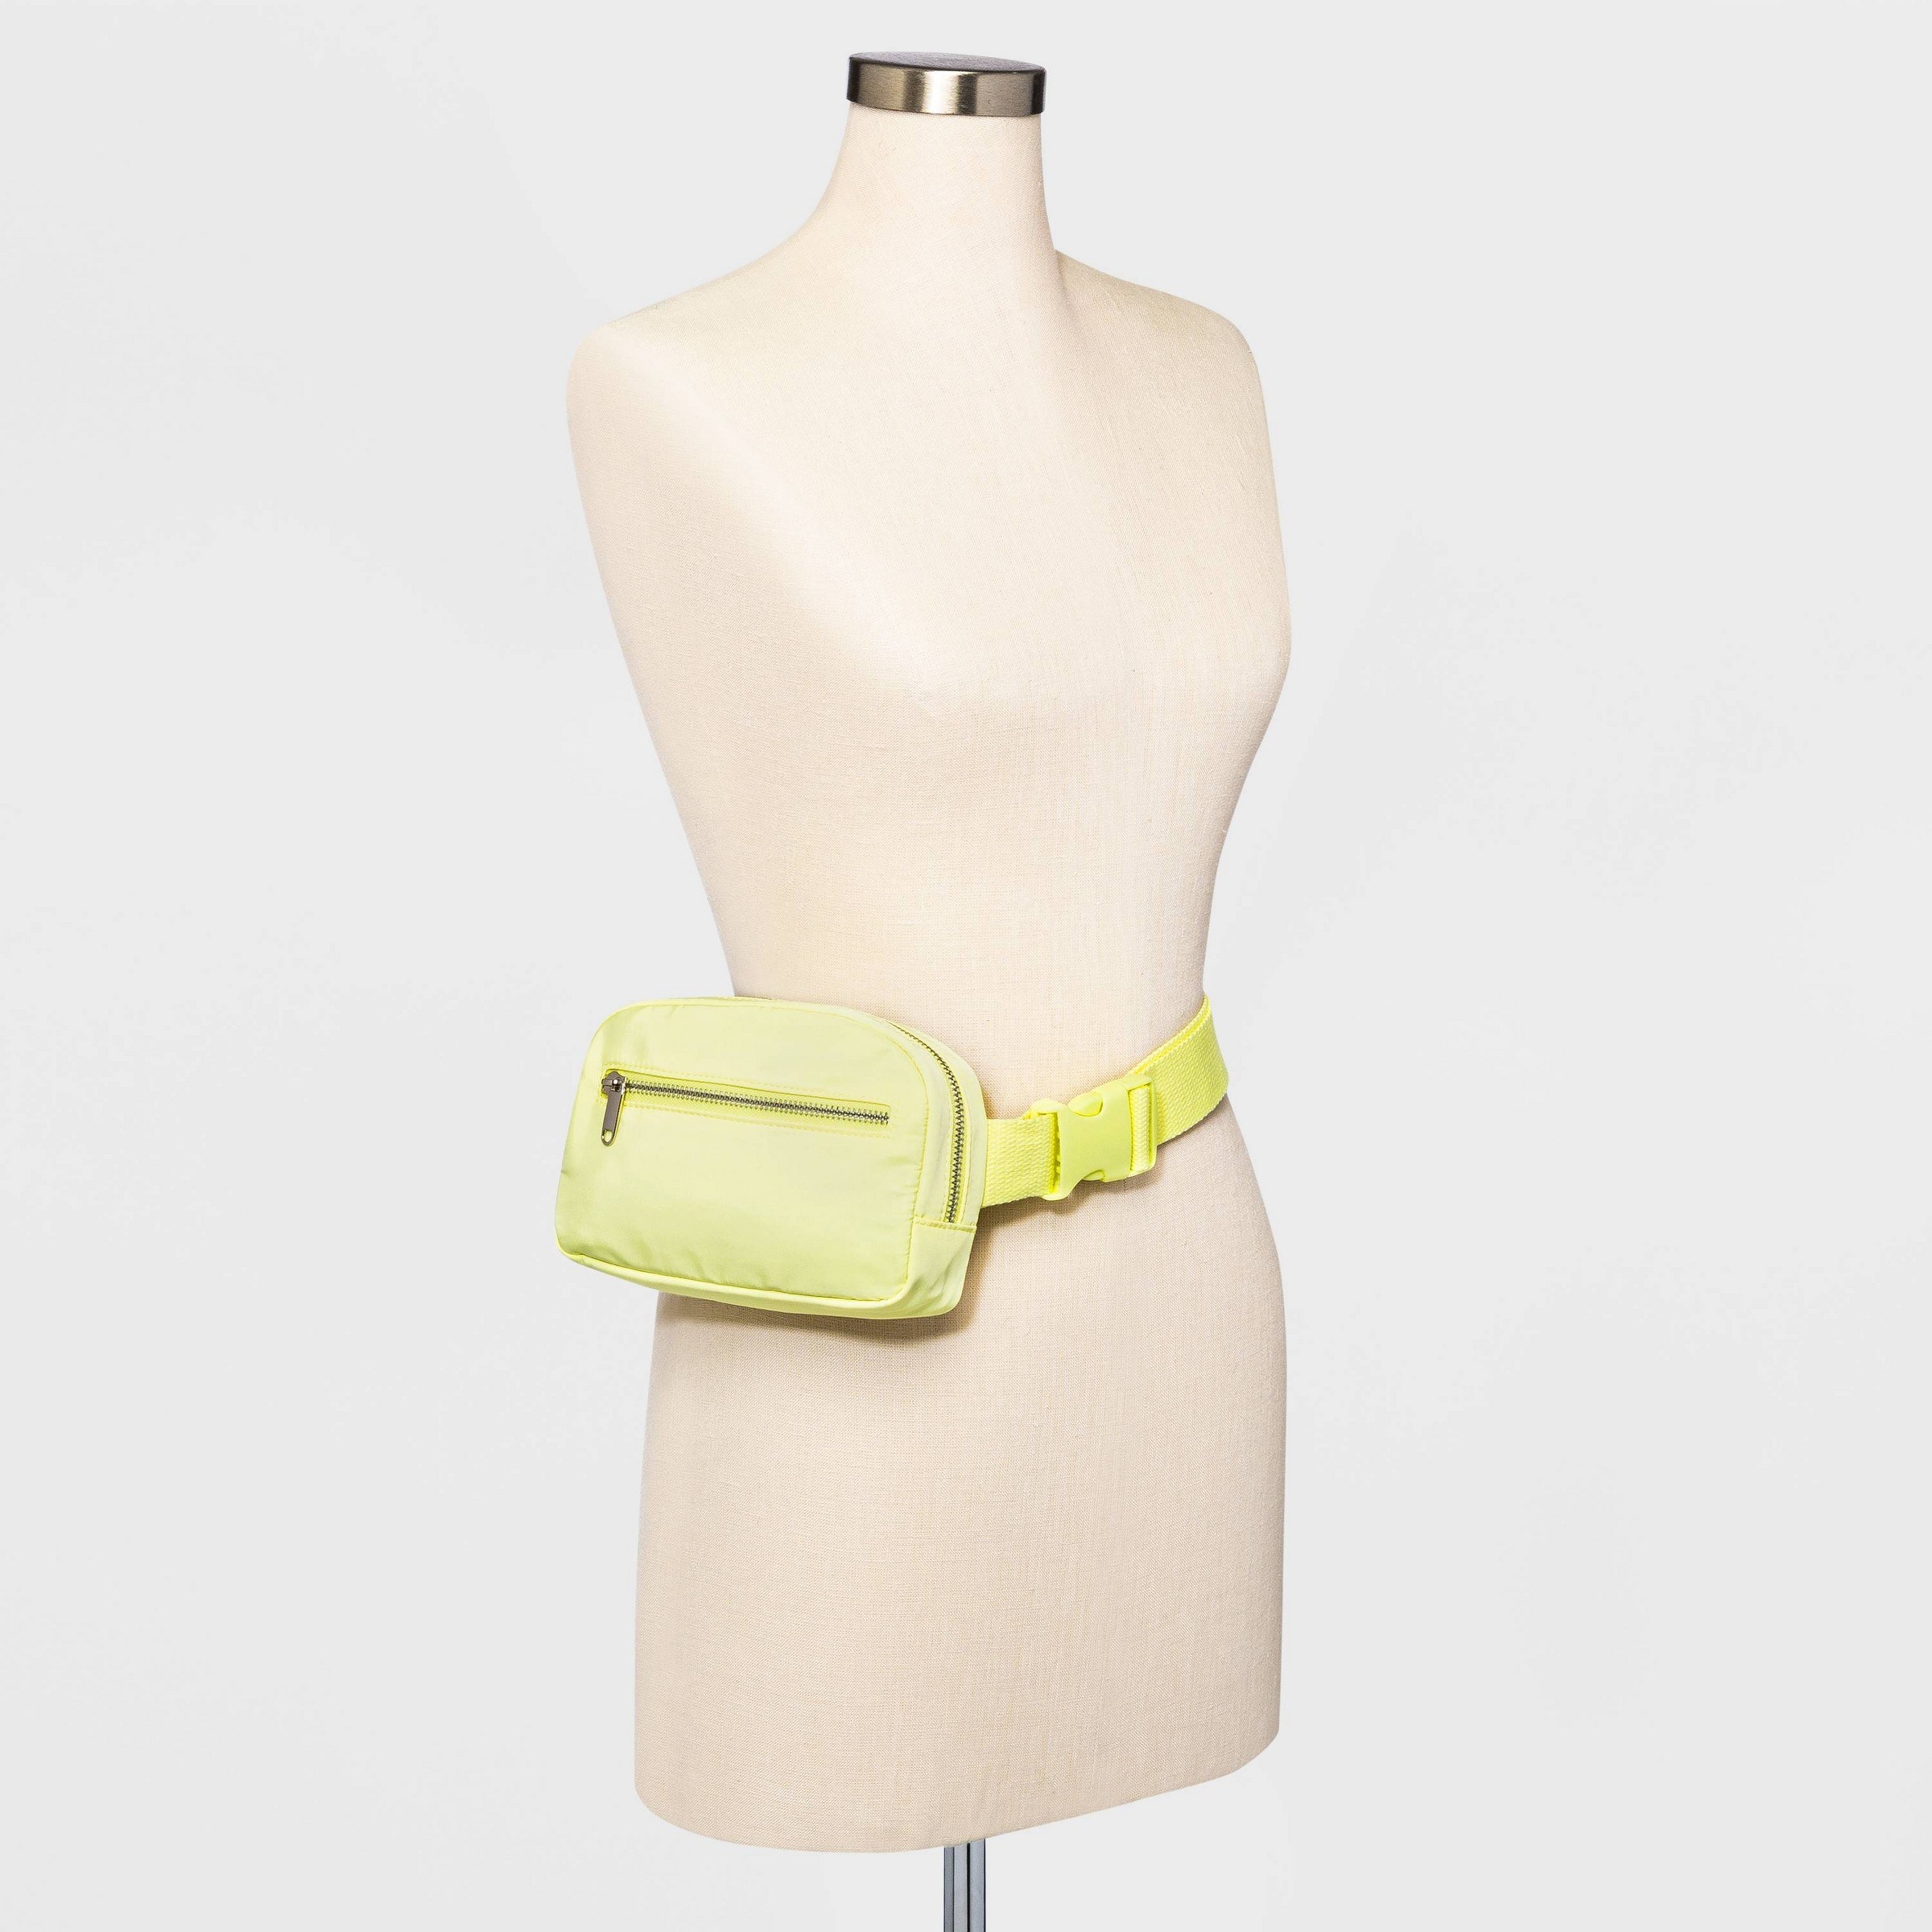 the fanny pack in yellow on a mannequin